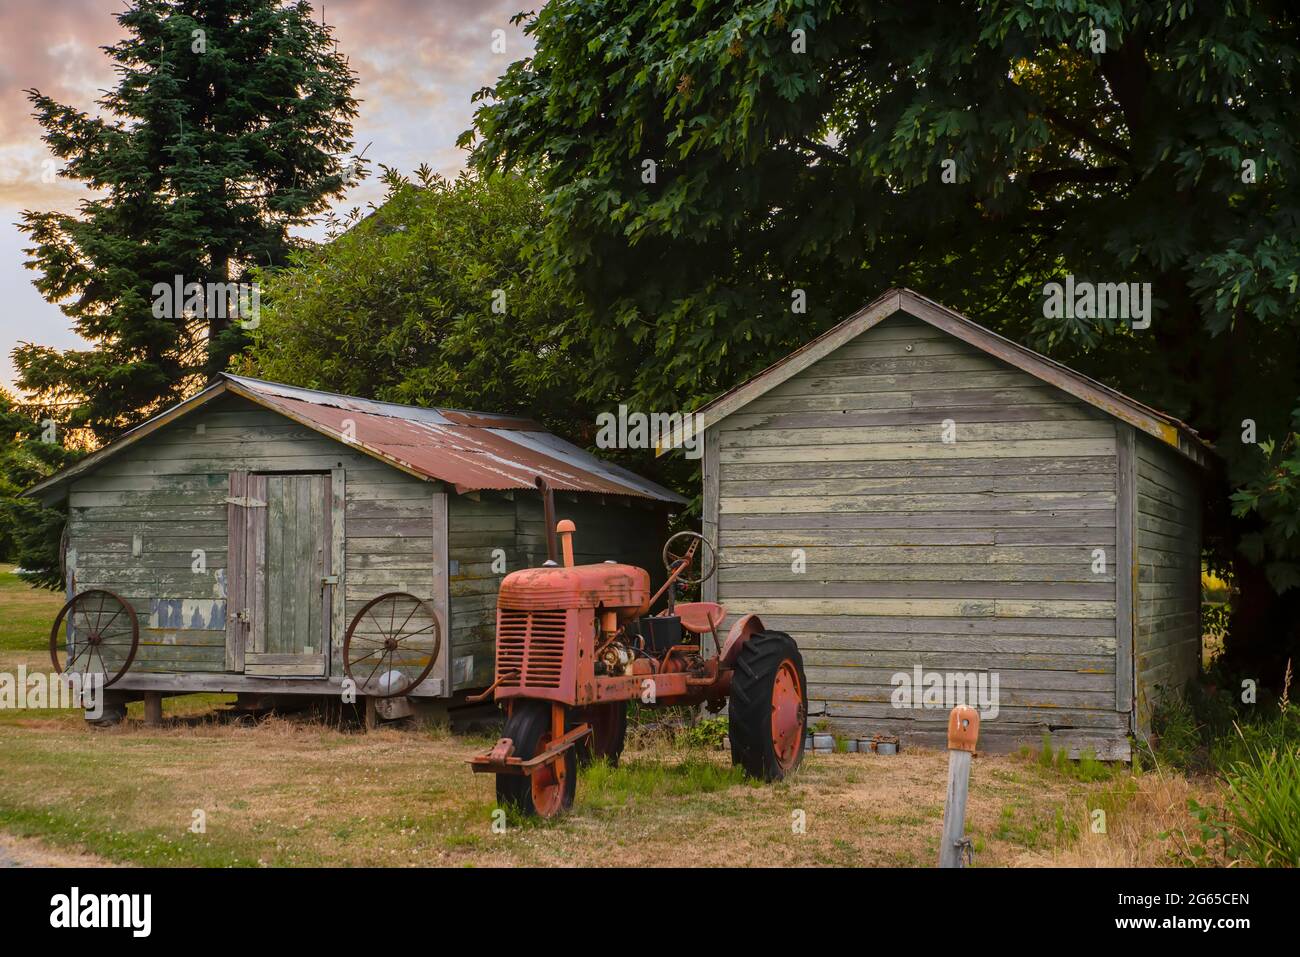 At sunset, an old red tractor stands on the grass near a wooden shed. Blue sky and pink clouds in the background. Stock Photo